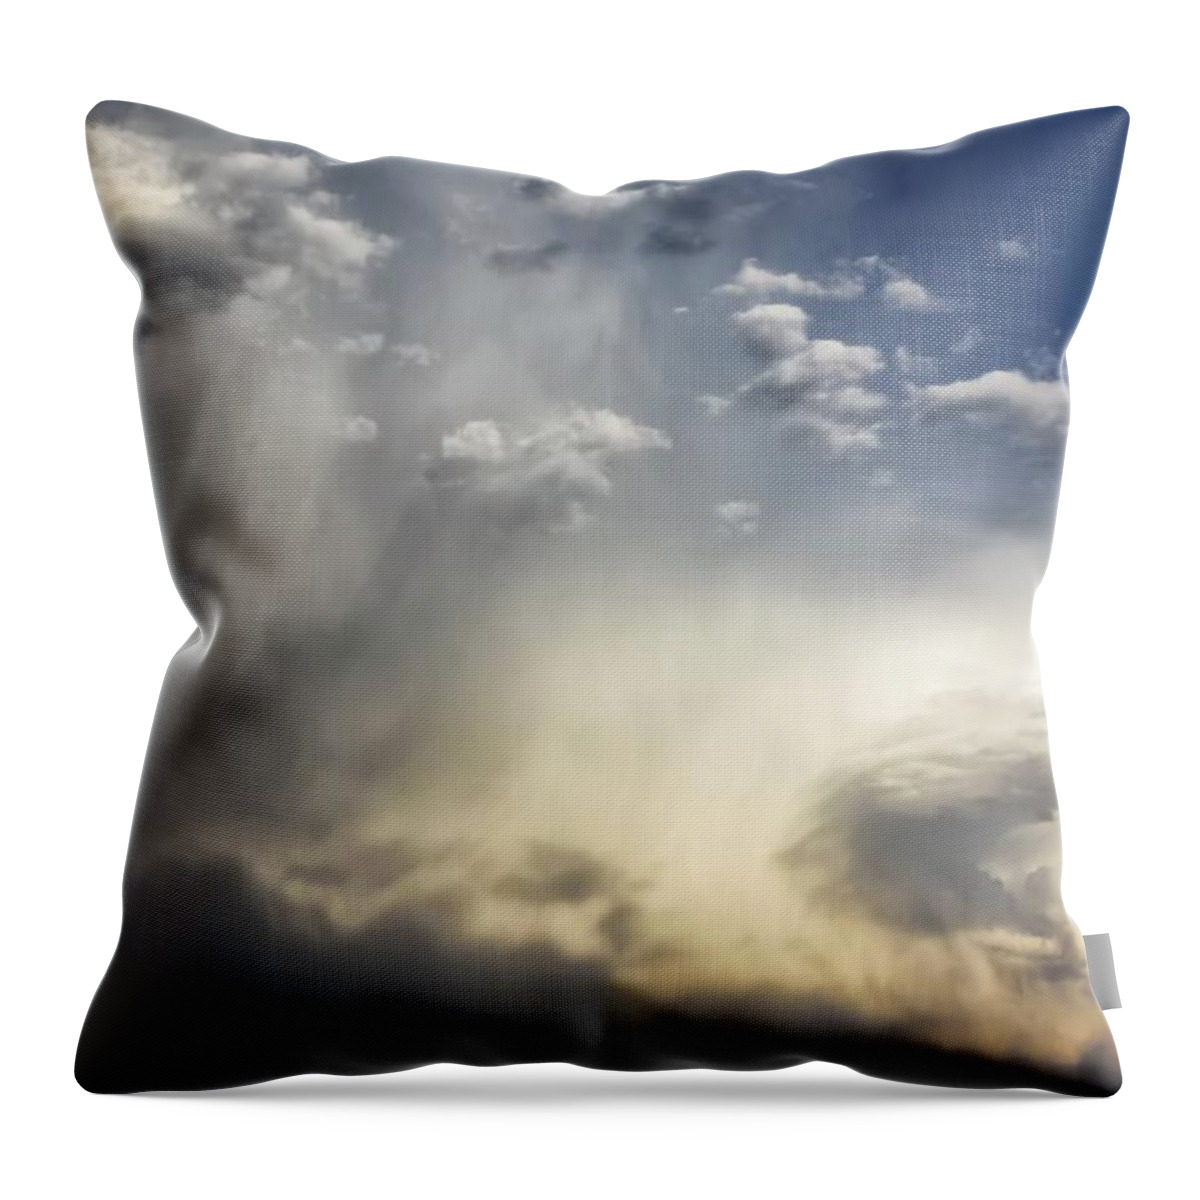 Clouds Throw Pillow featuring the photograph Crazy Clouds by Steve Sullivan